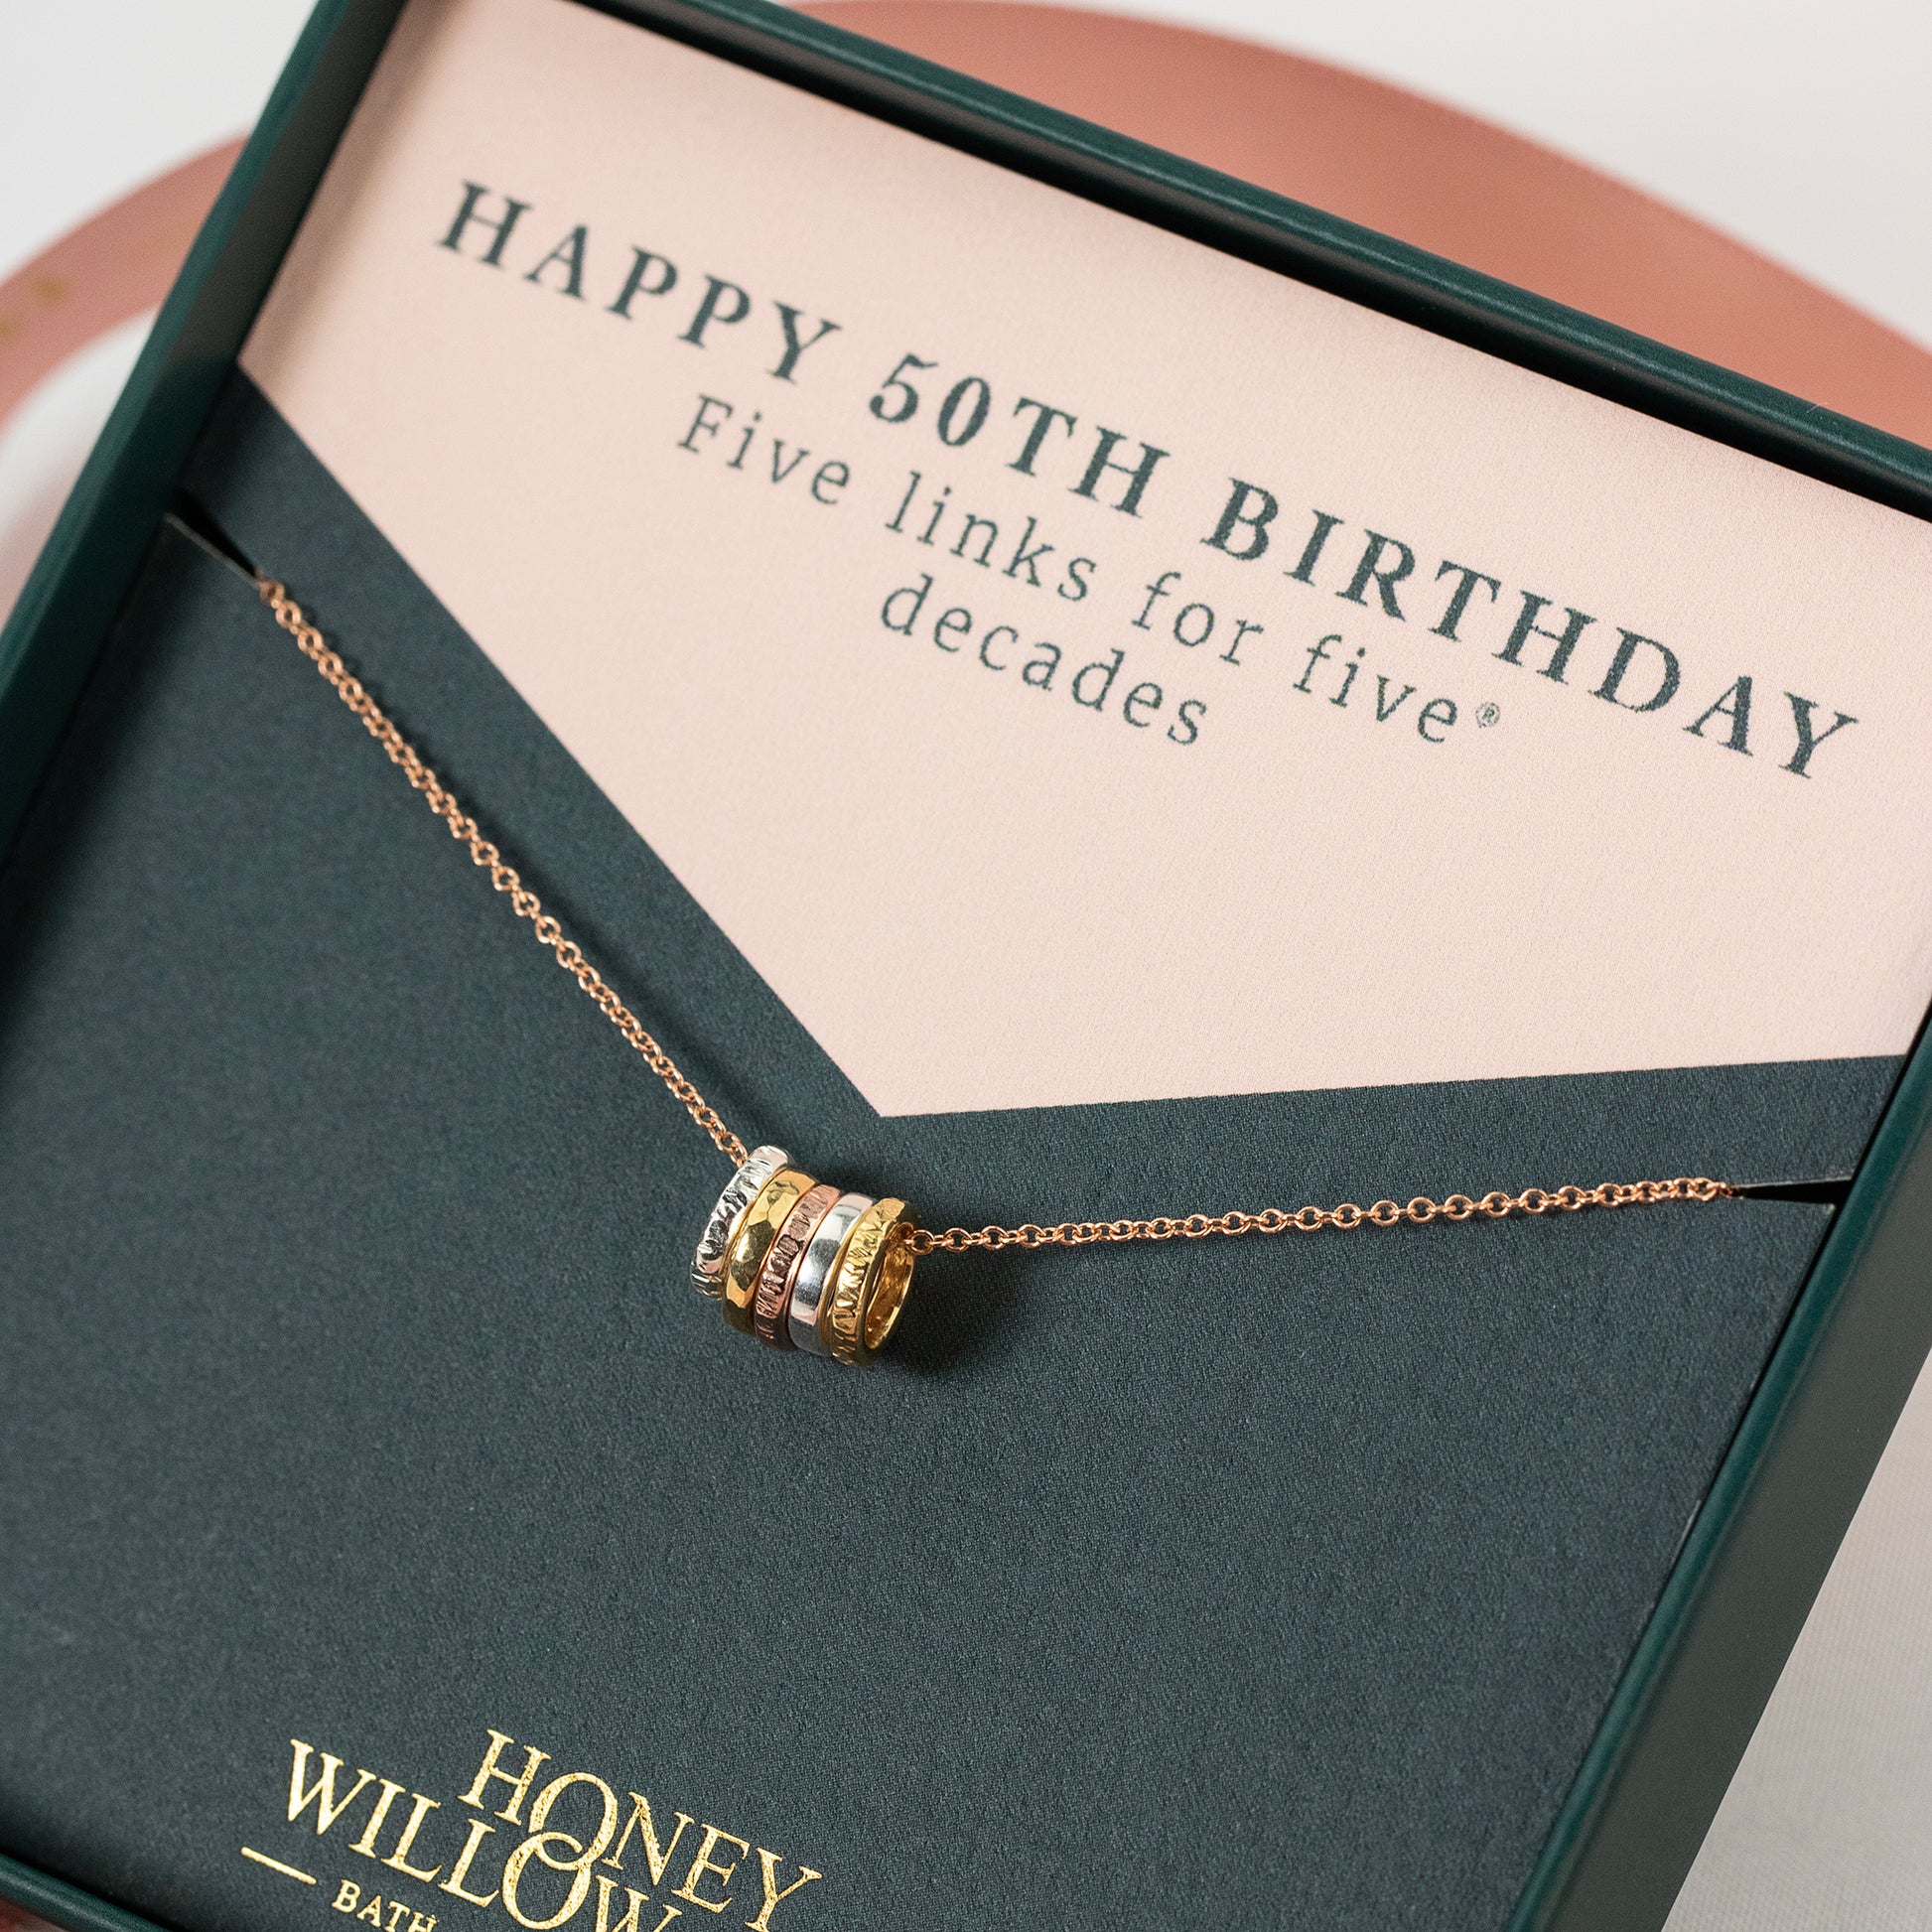 50th Birthday Necklace - 5 Links for 5 Decades - Tiny Links